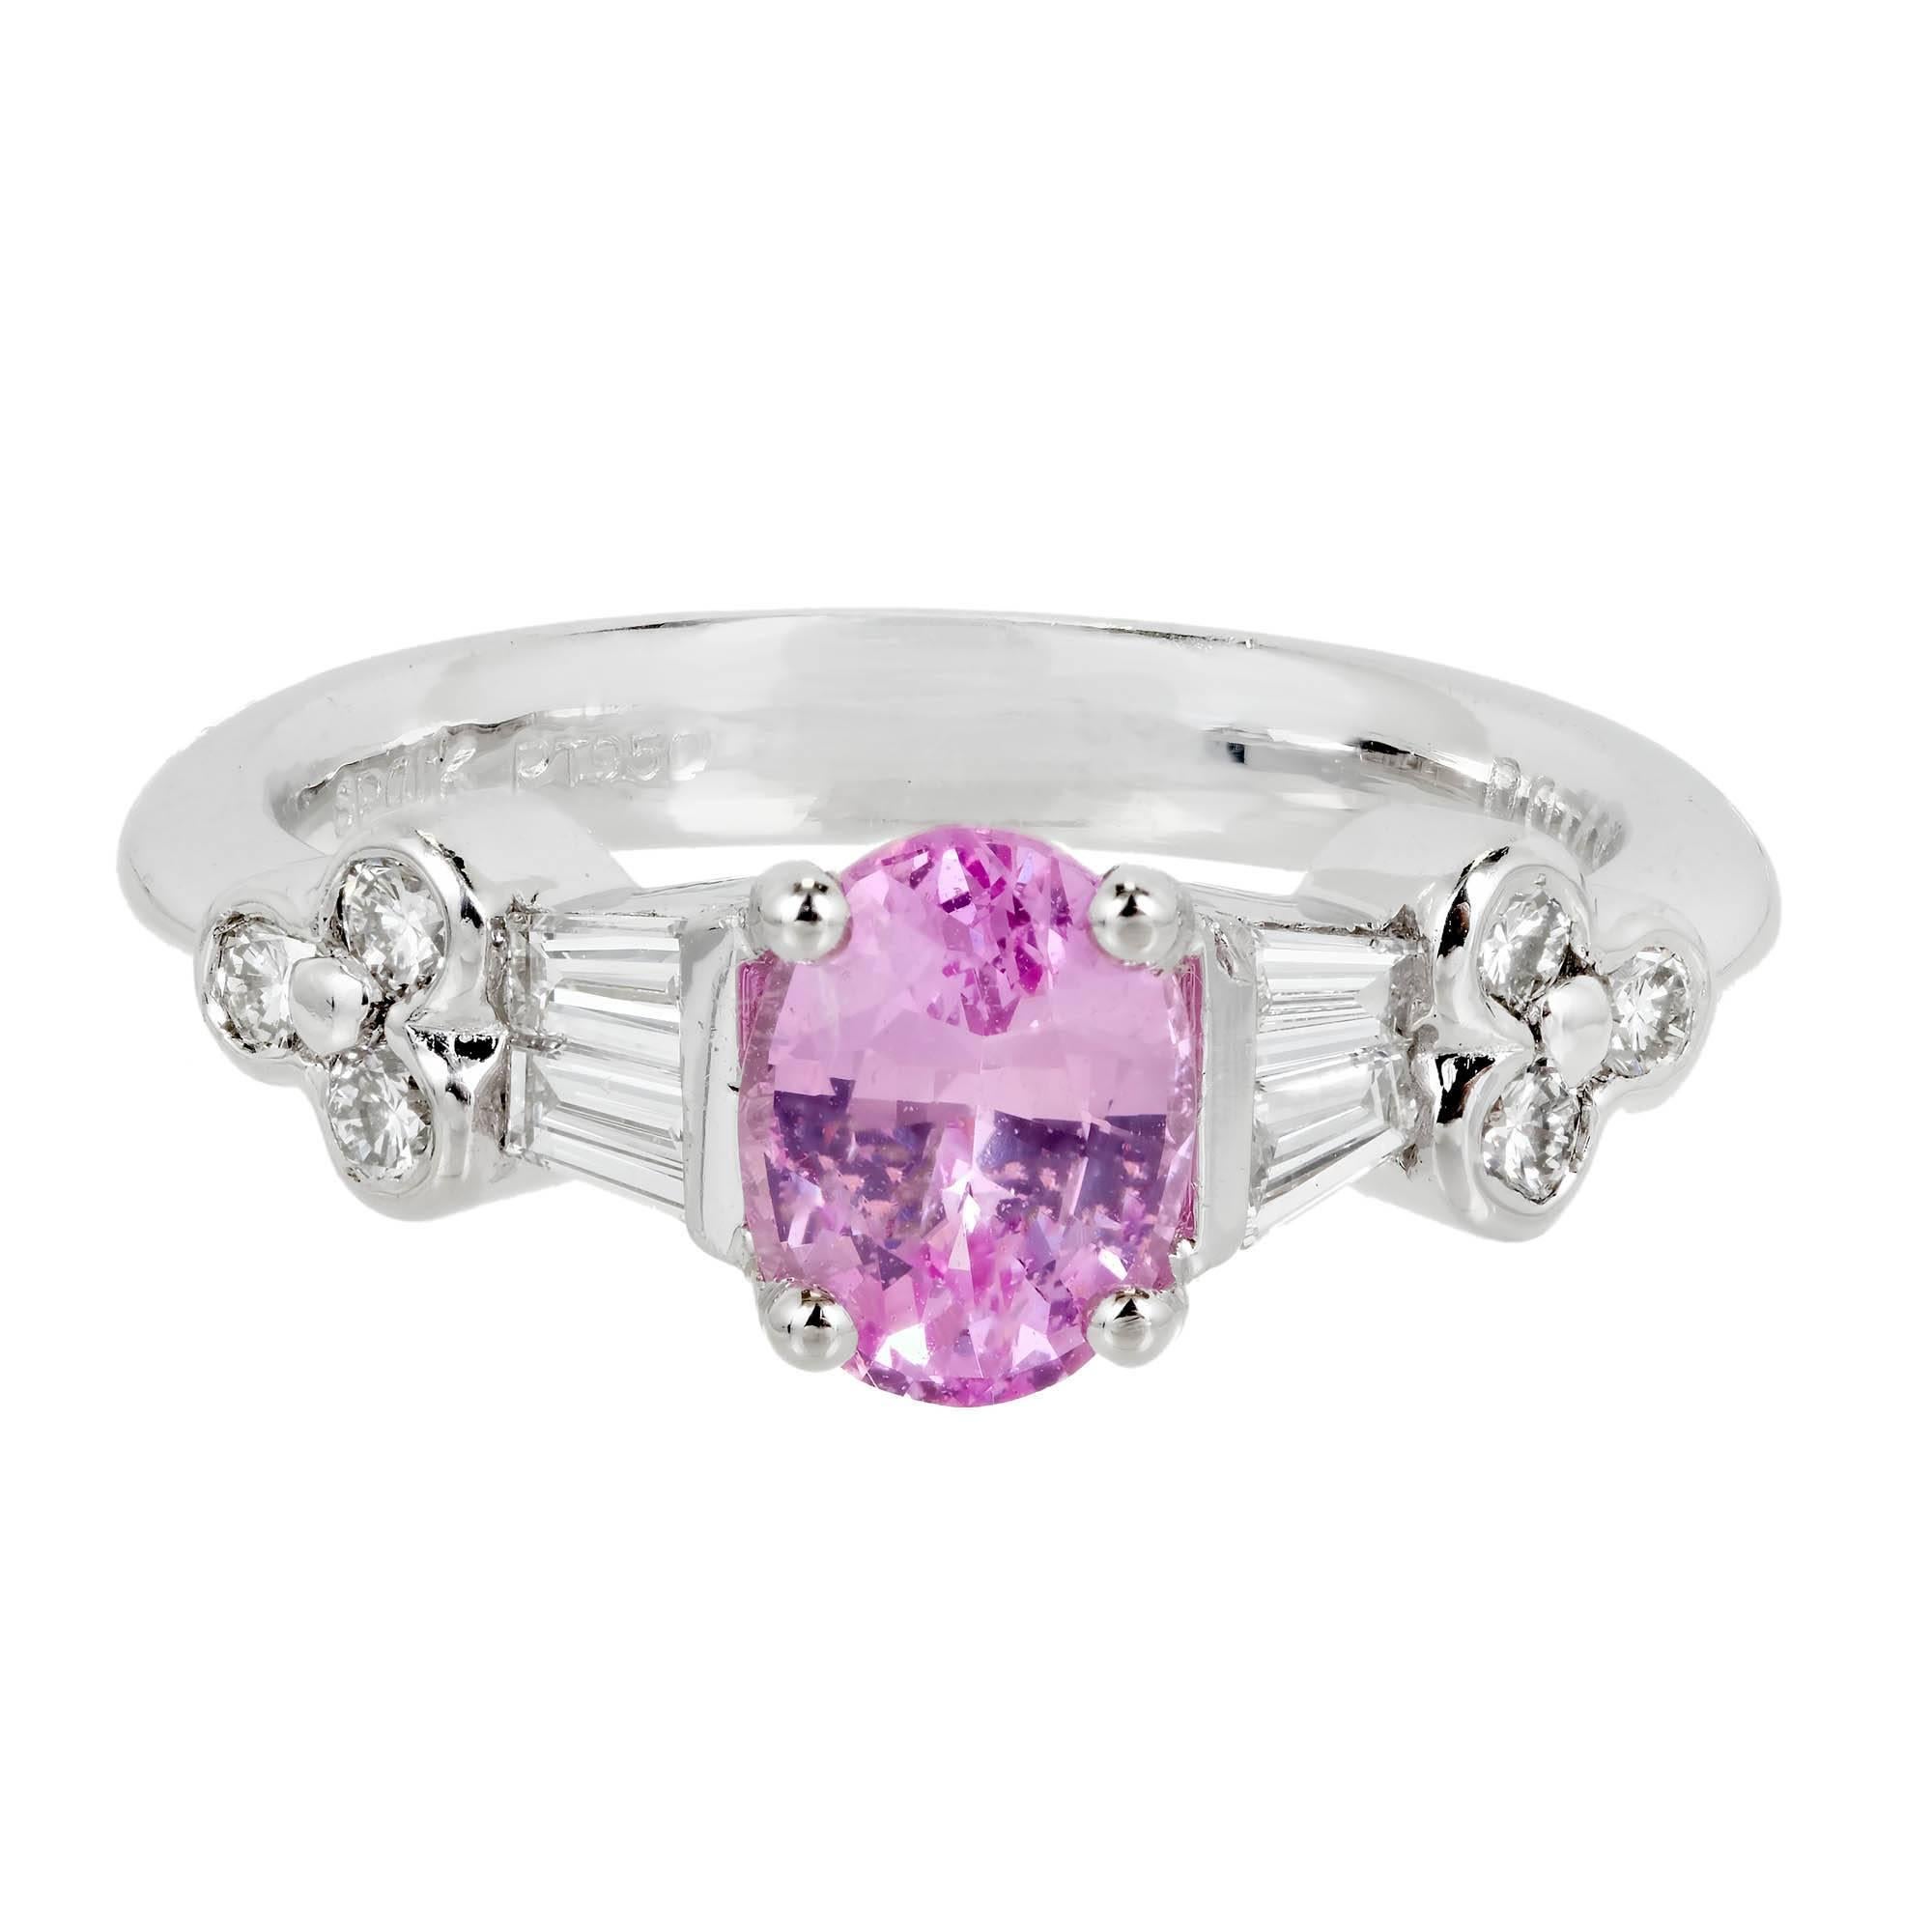 Spark GIA Certified Pink Oval Sapphire Diamond Platinum Engagement Ring